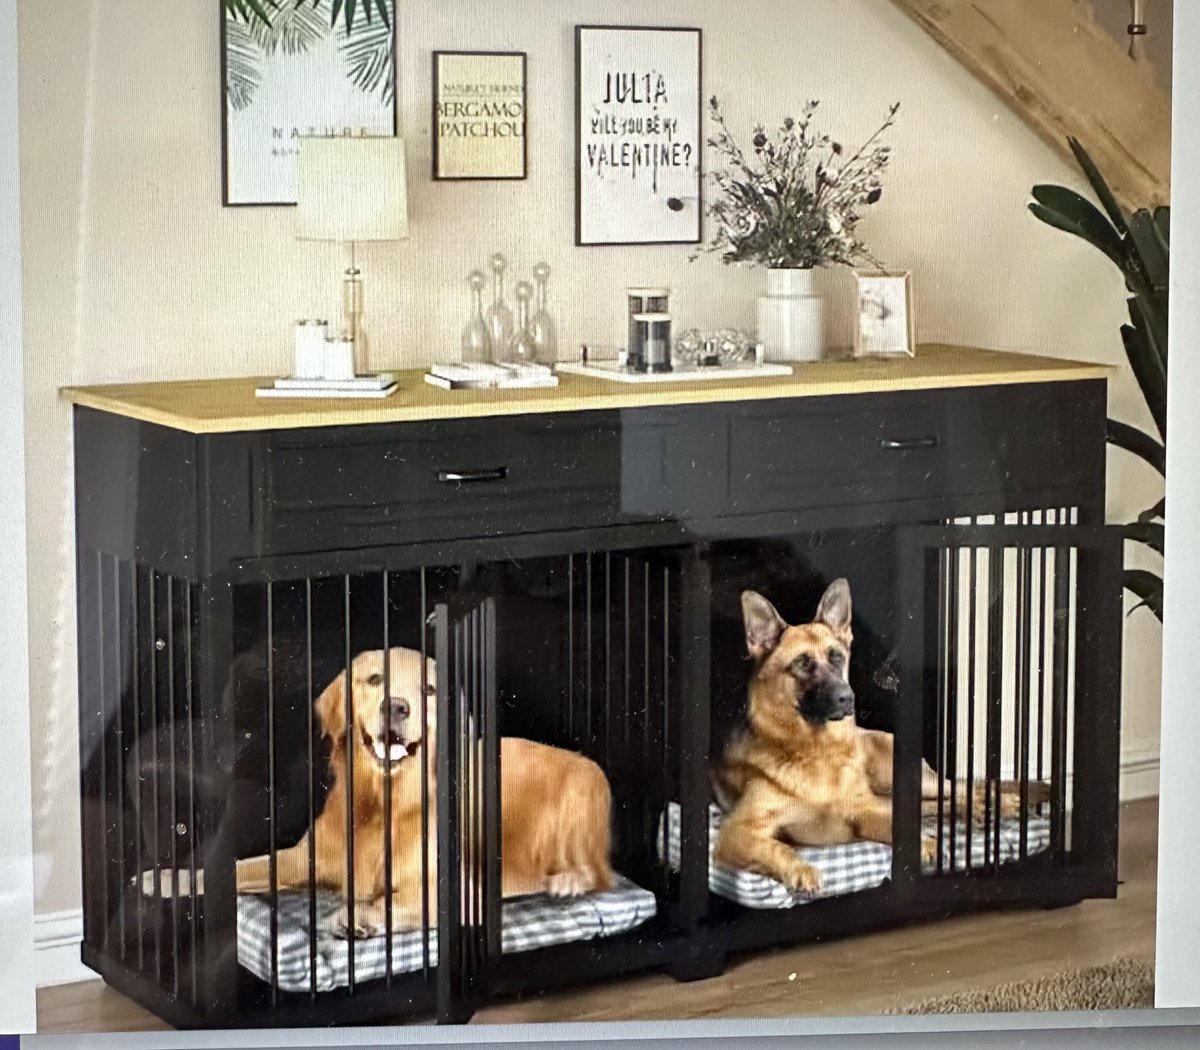 they said it couldn’t be done: the credenza / dog jail